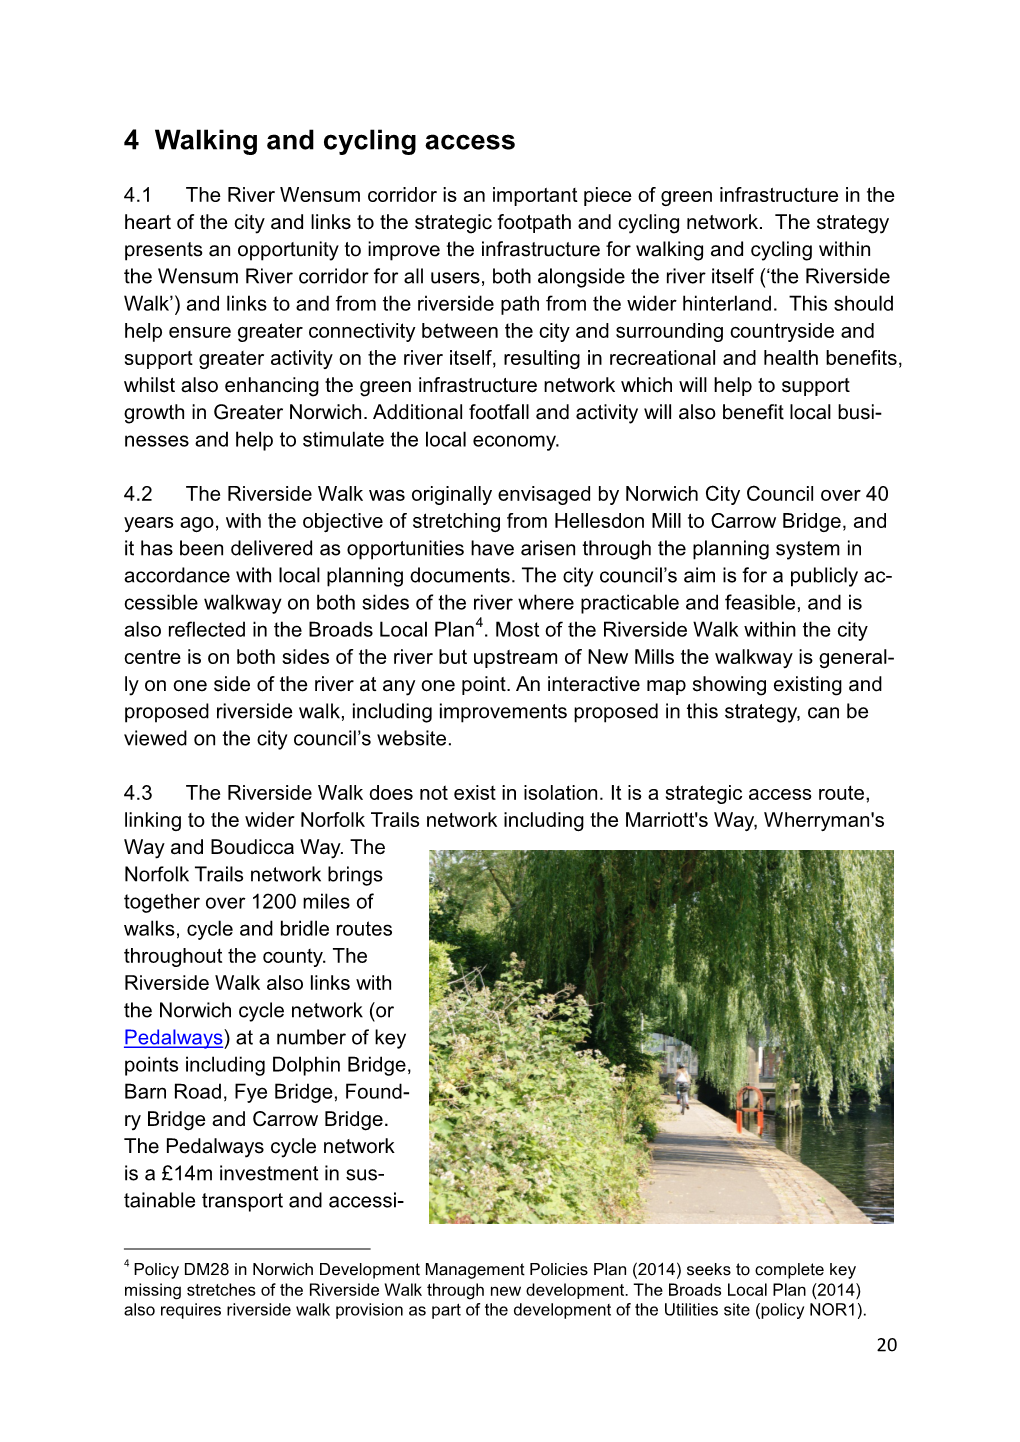 River Wensum Strategy Partnership, and That of the Greater Norwich Growth Board, to Connect the Walk out to Whitlingham Country Park